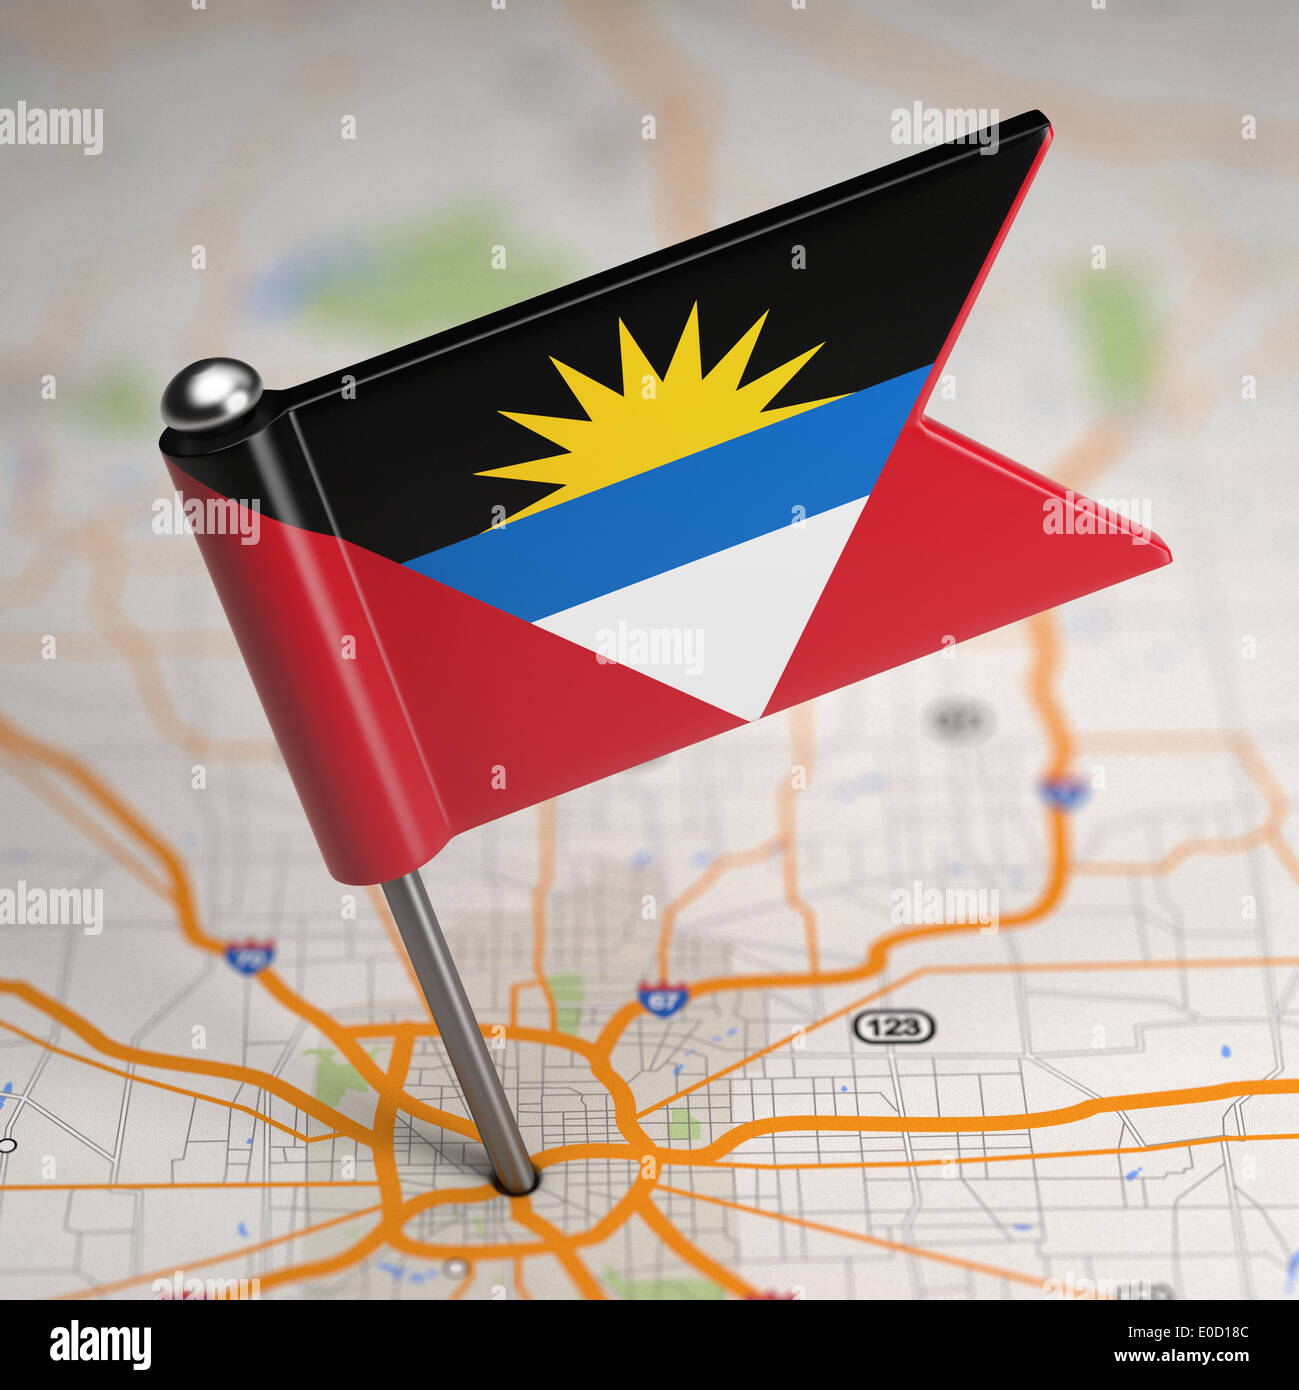 Antigua and Barbuda Small Flag on a Map Background. Stock Photo